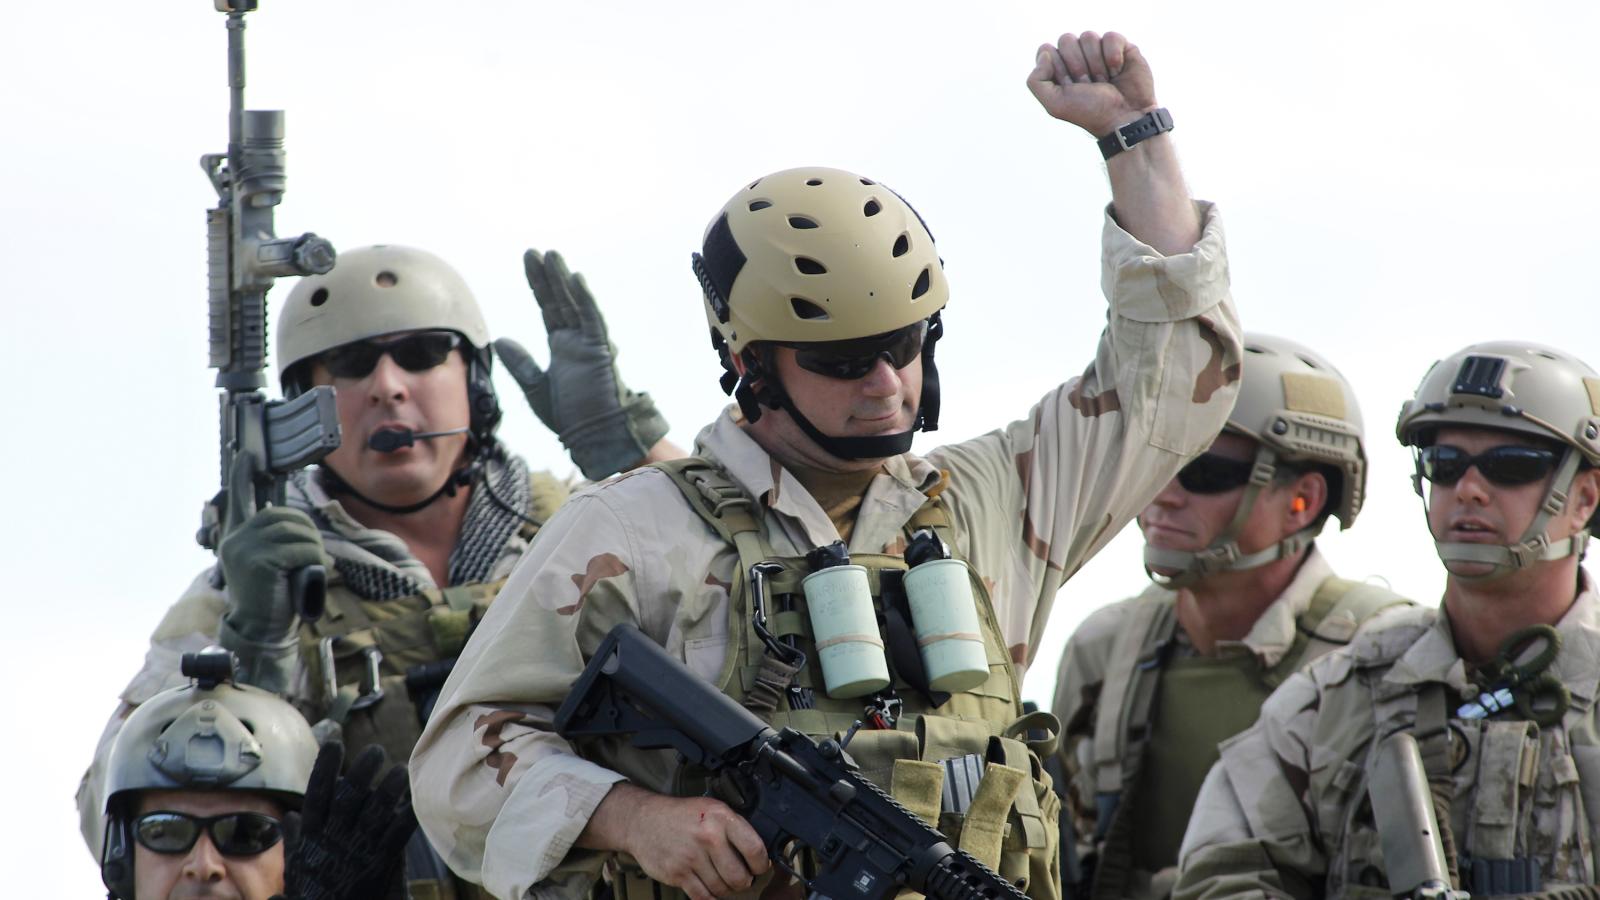 US Navy SEALs conquer fear using four simple steps